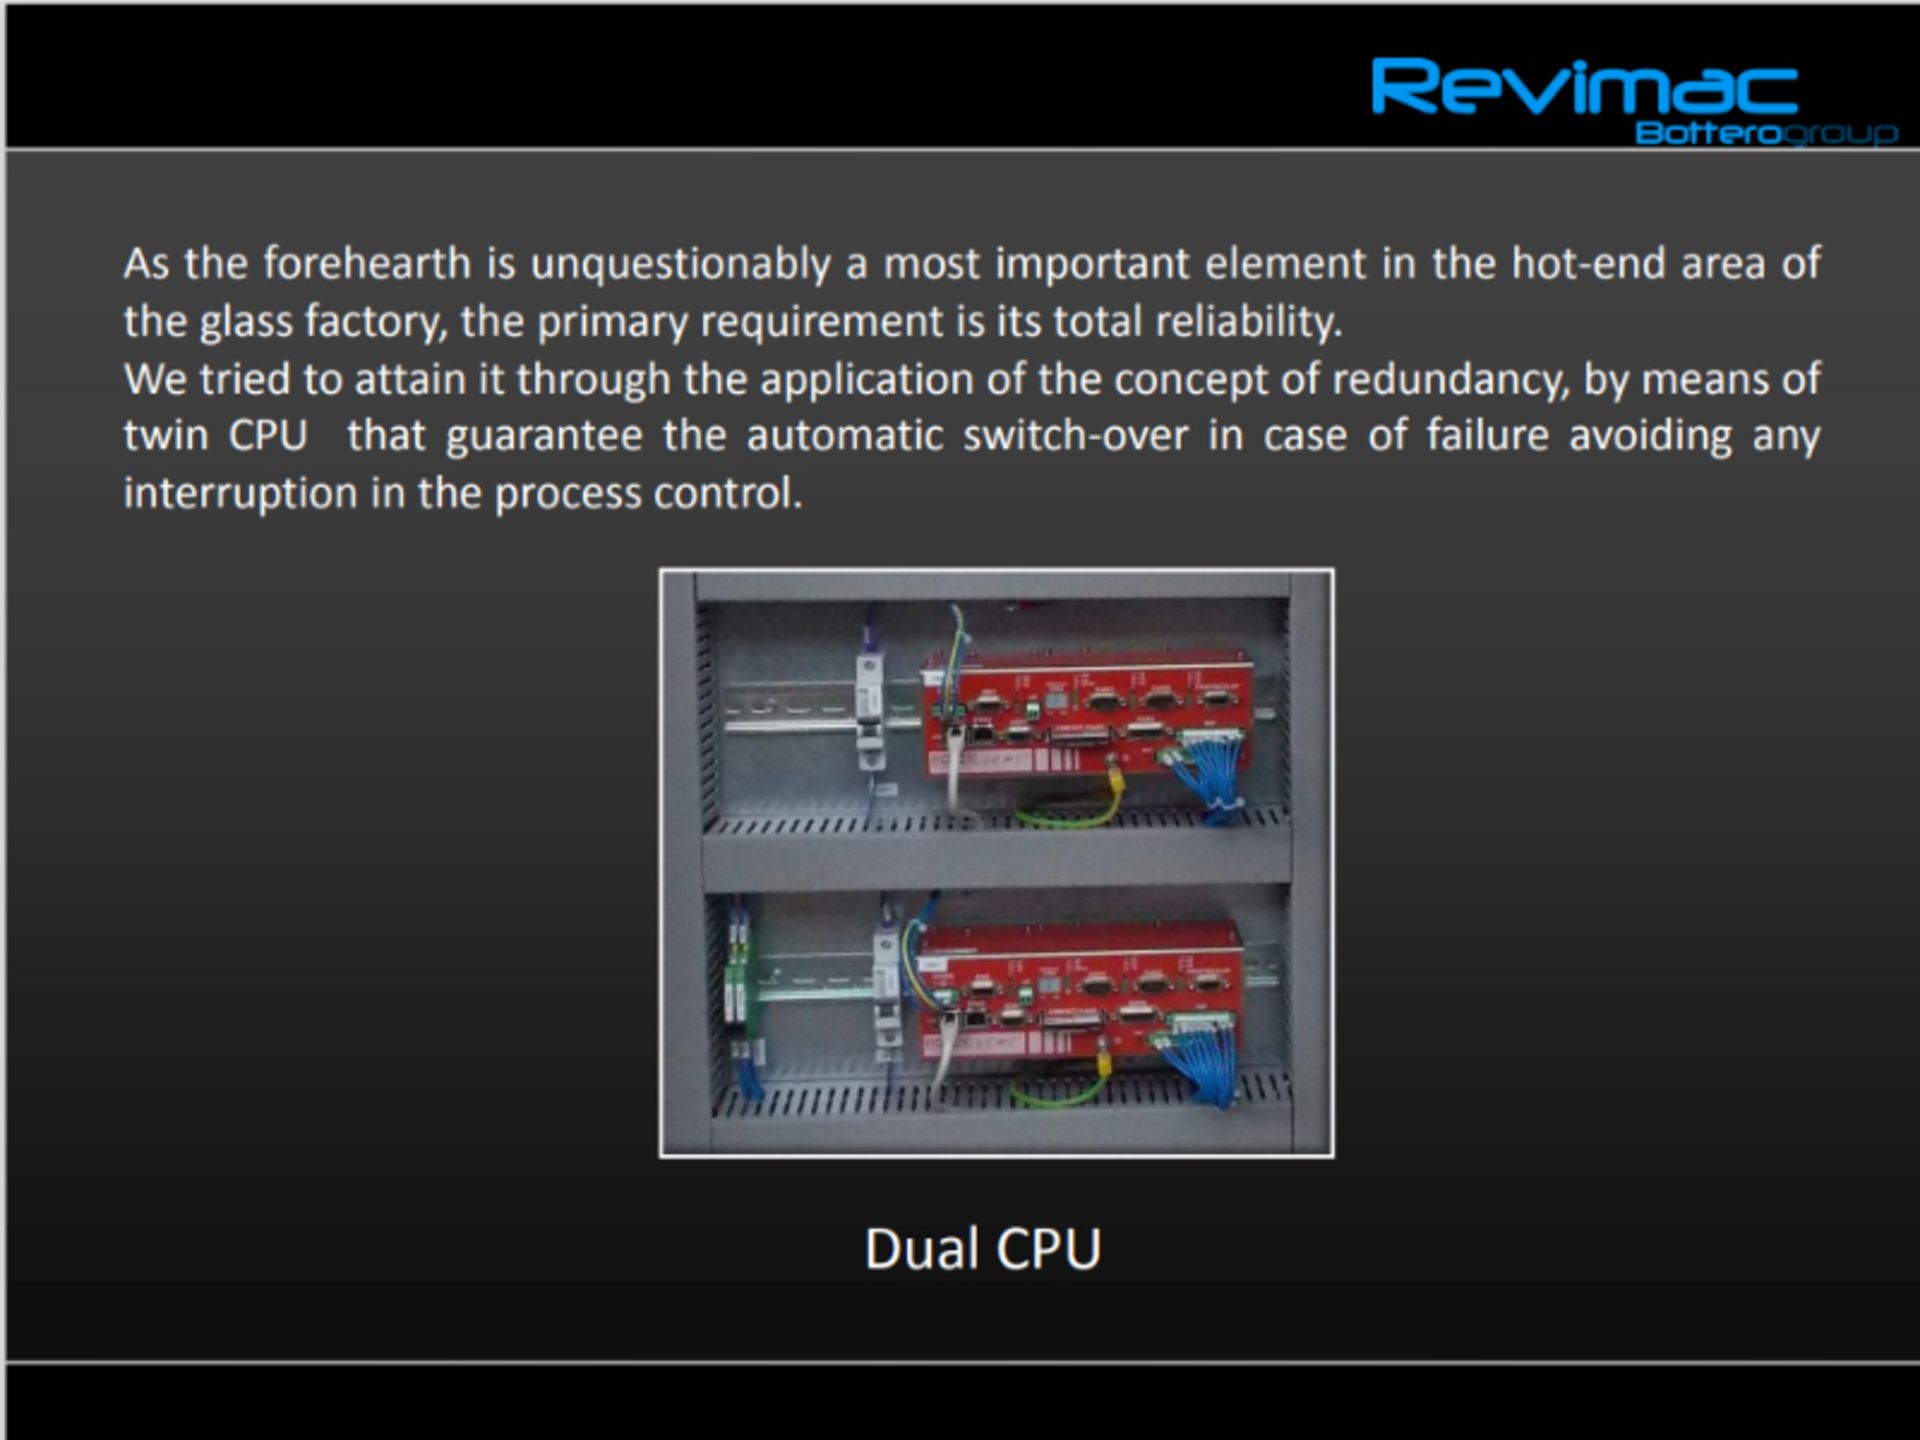 Revimac Forehearth Control System *Subject to Confirmation* - Image 14 of 18